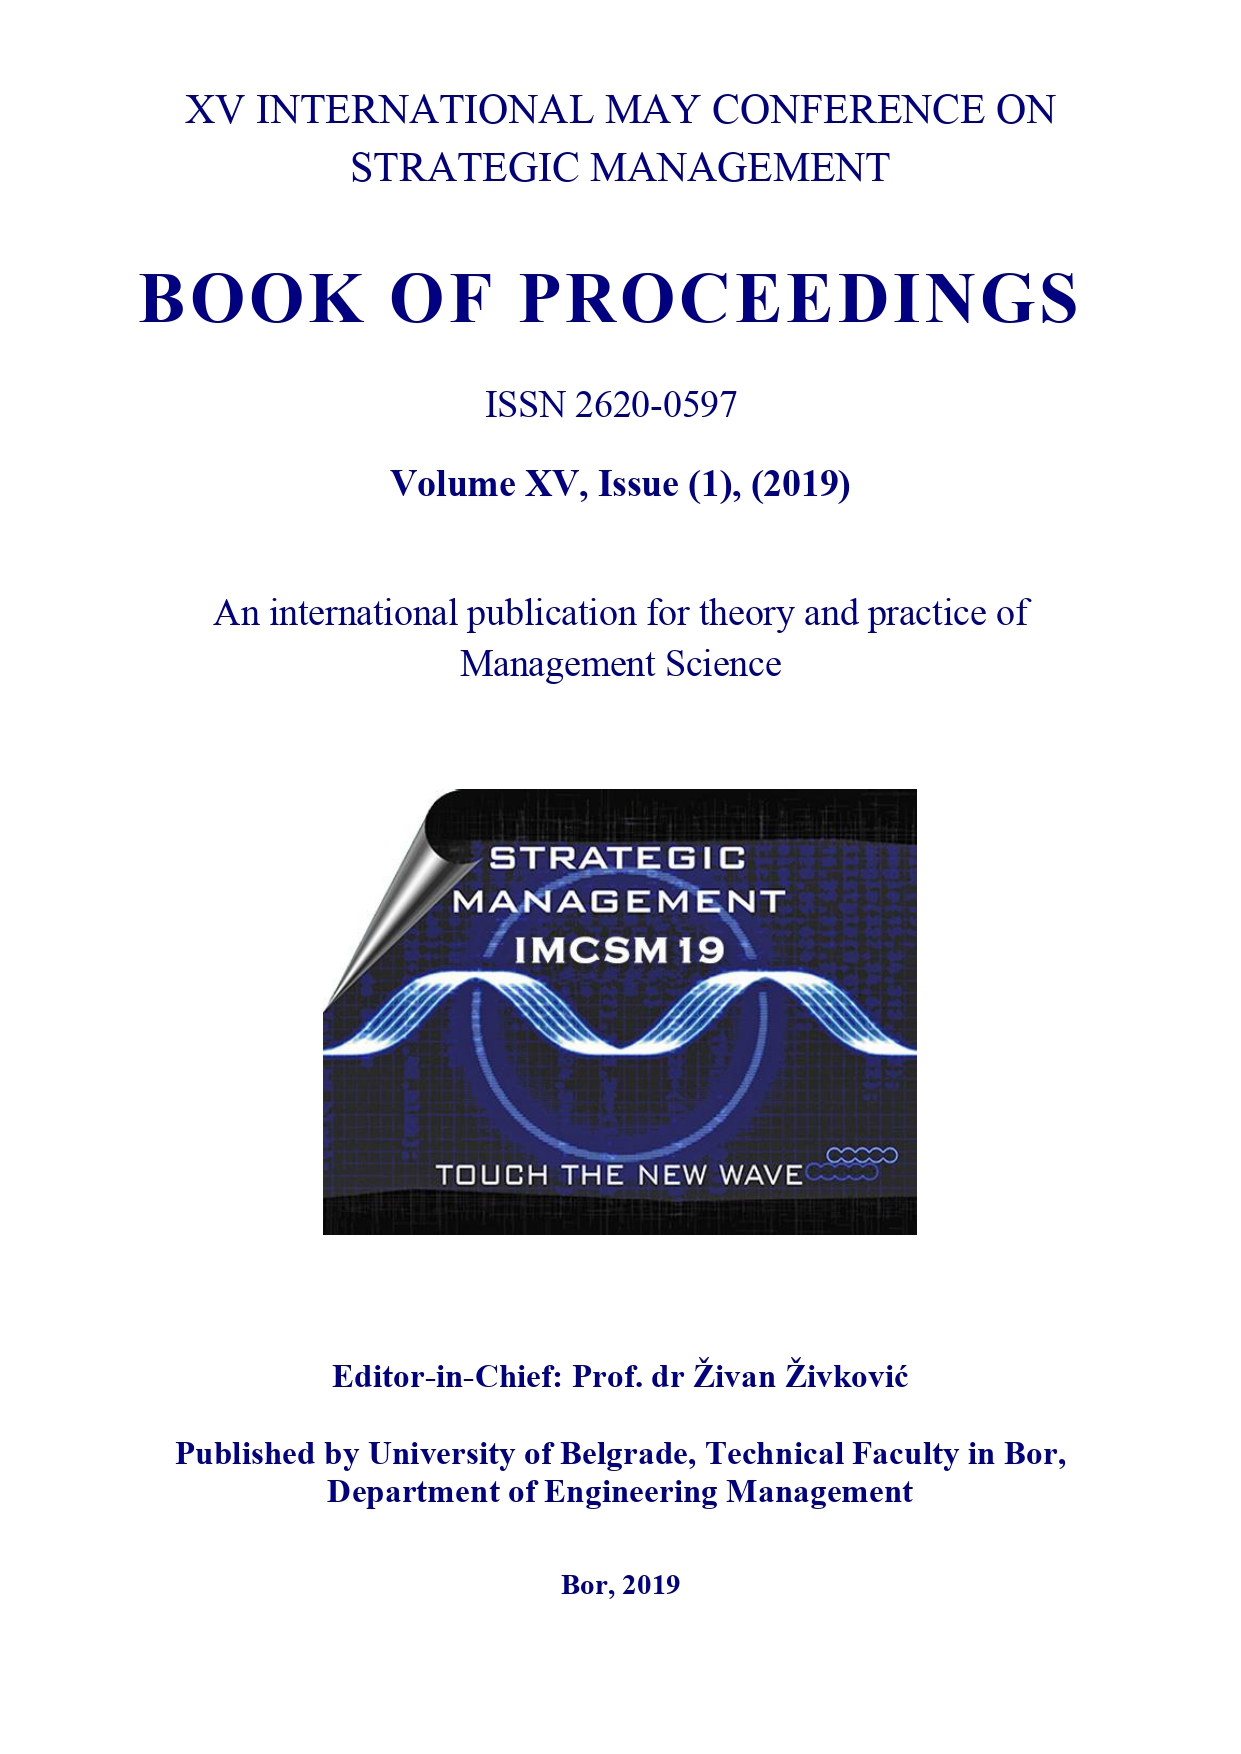 Book of Proceedings International May Conference on Strategic Management, IMCSM19